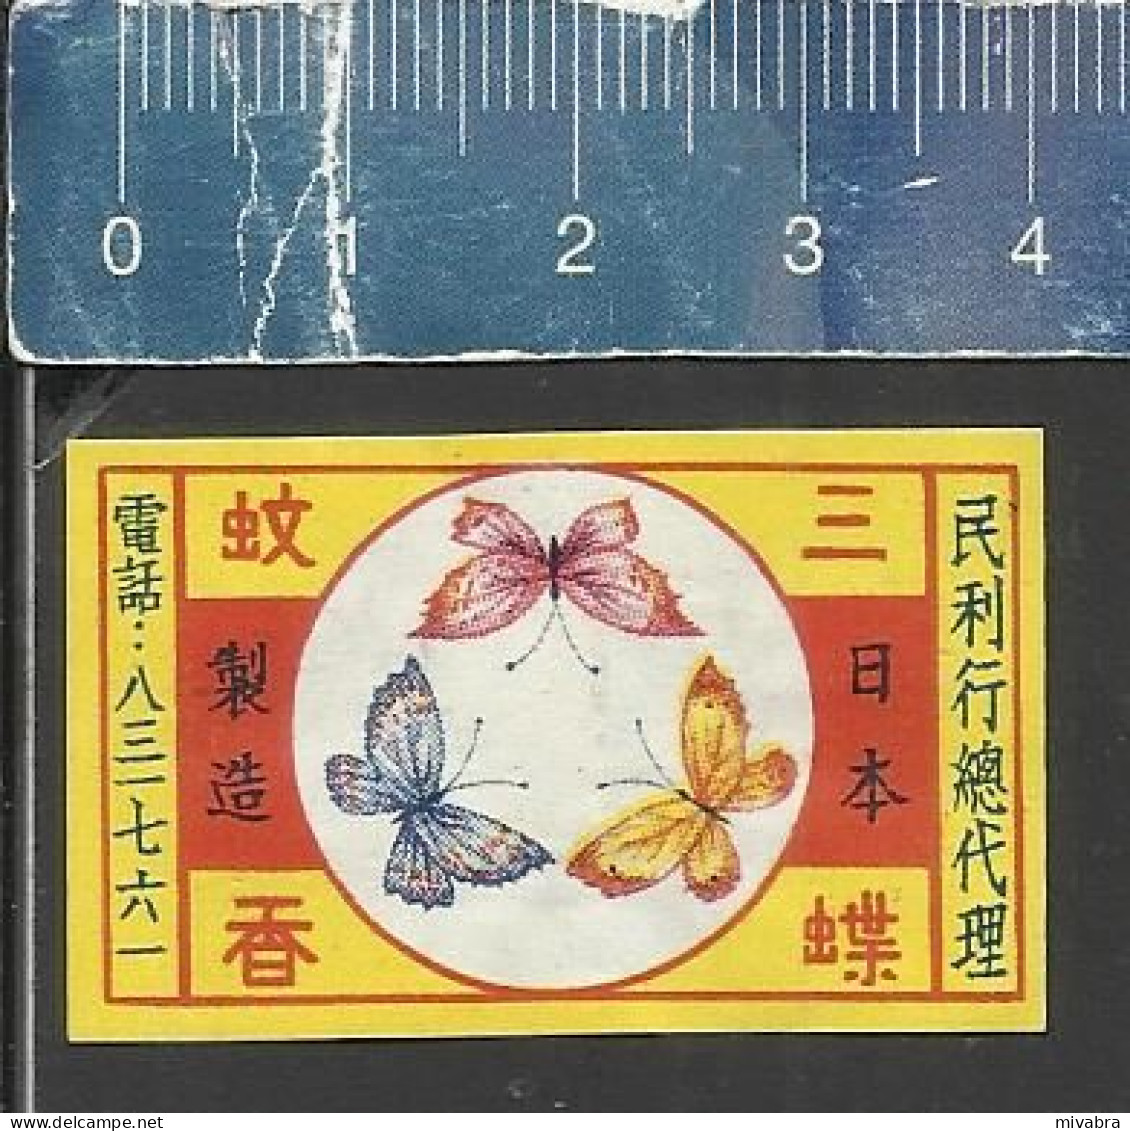 BUTTERFLIES ( BUTTERFLY VLINDERS PAPILLONS ) OLD VINTAGE SMALL MATCHBOX LABEL MADE IN CHINA - Scatole Di Fiammiferi - Etichette